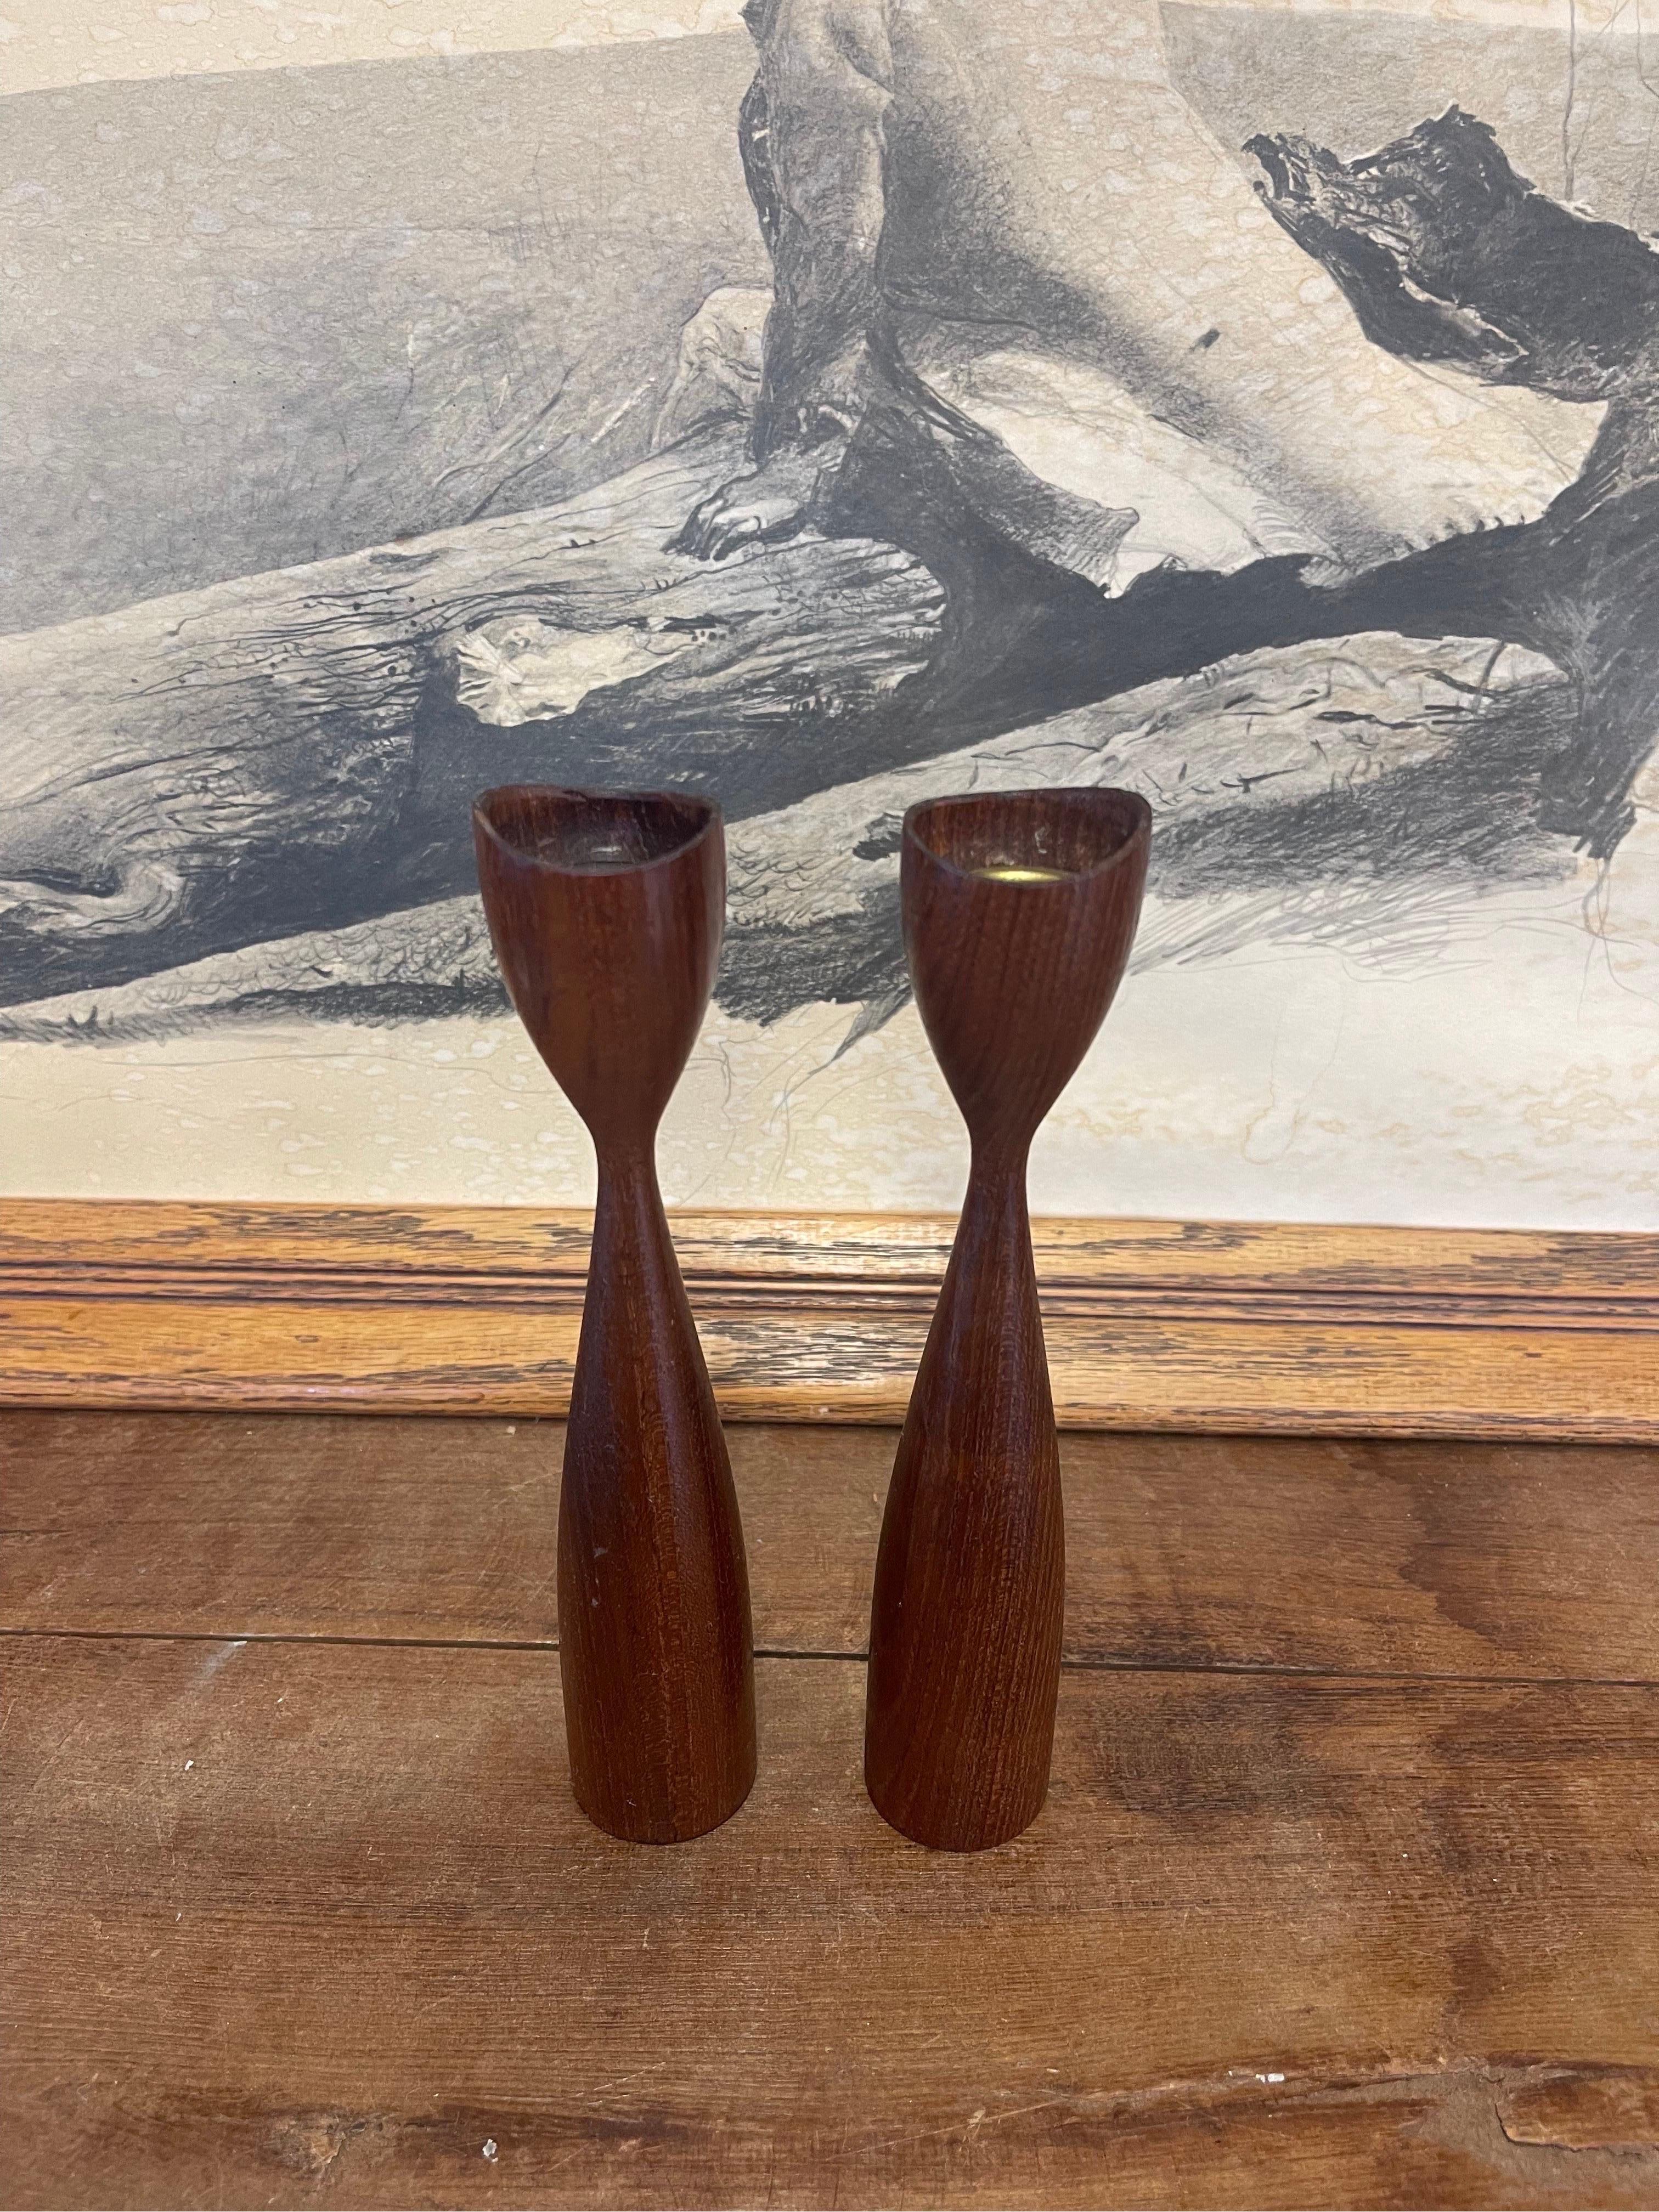 Walnut Toned Decorative Candle Stick Holder. Atomic Design. Circa 1960s- 1970s. Possibly Teak. The Inner Metal Piece is missing from one of the Holders as Shown. Vintage Condition Consistent with Age as Pictured.

Dimensions. 2 W ; 2 D ; 9 H